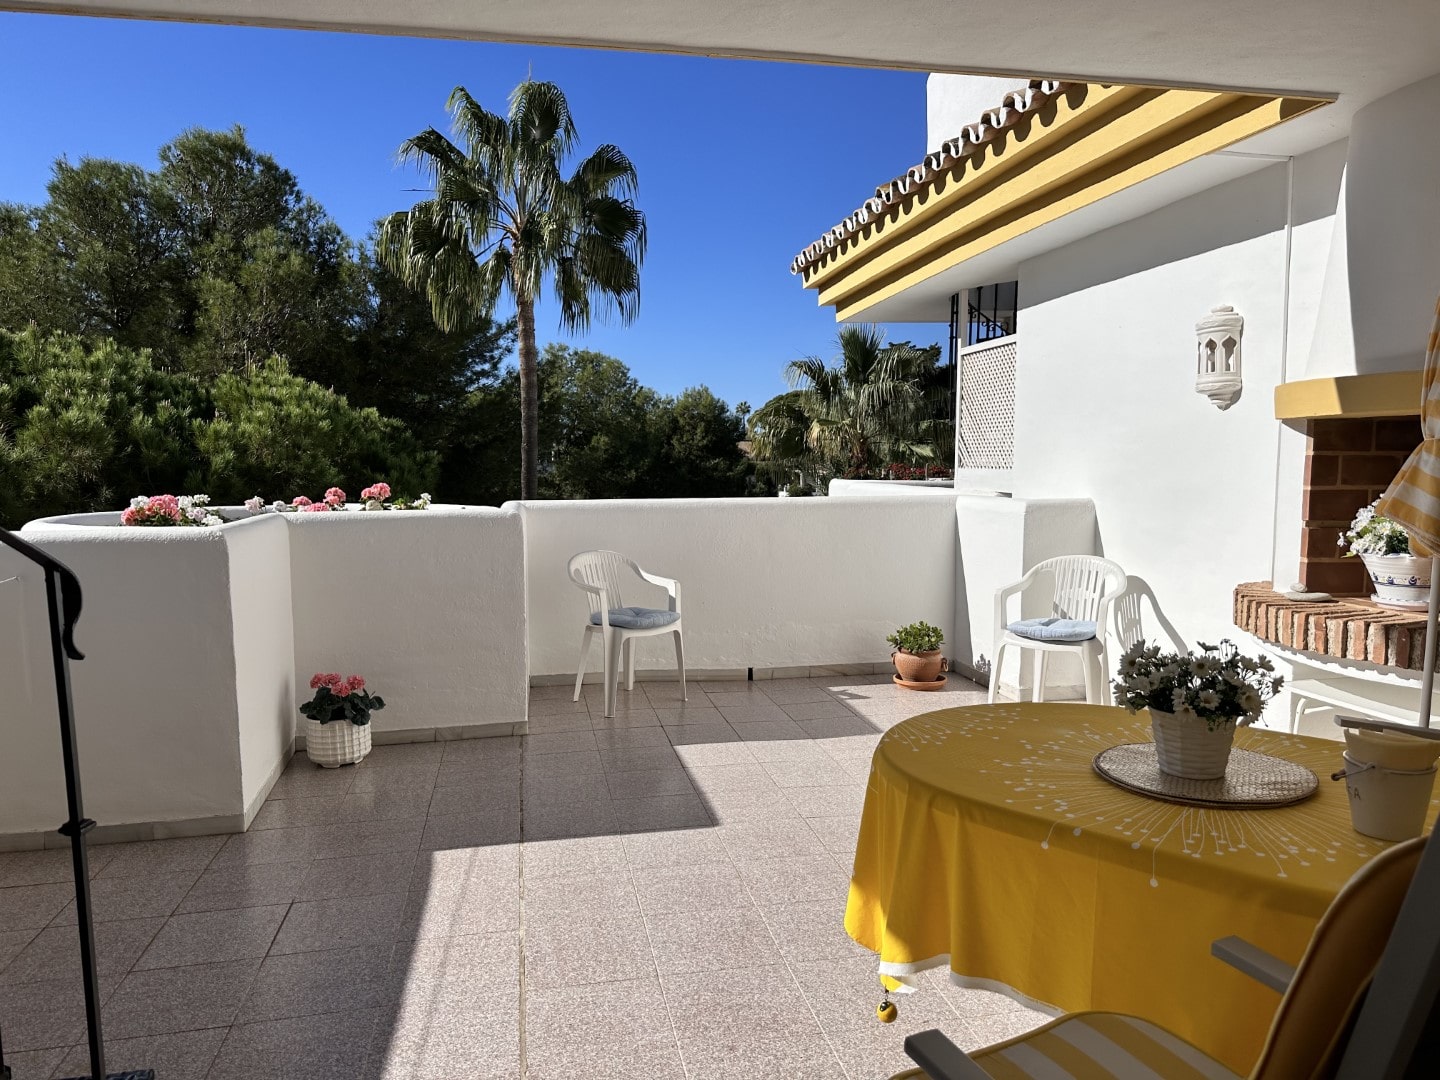 Penthouse with private roof terrace surrounded by the Calahonda golf course